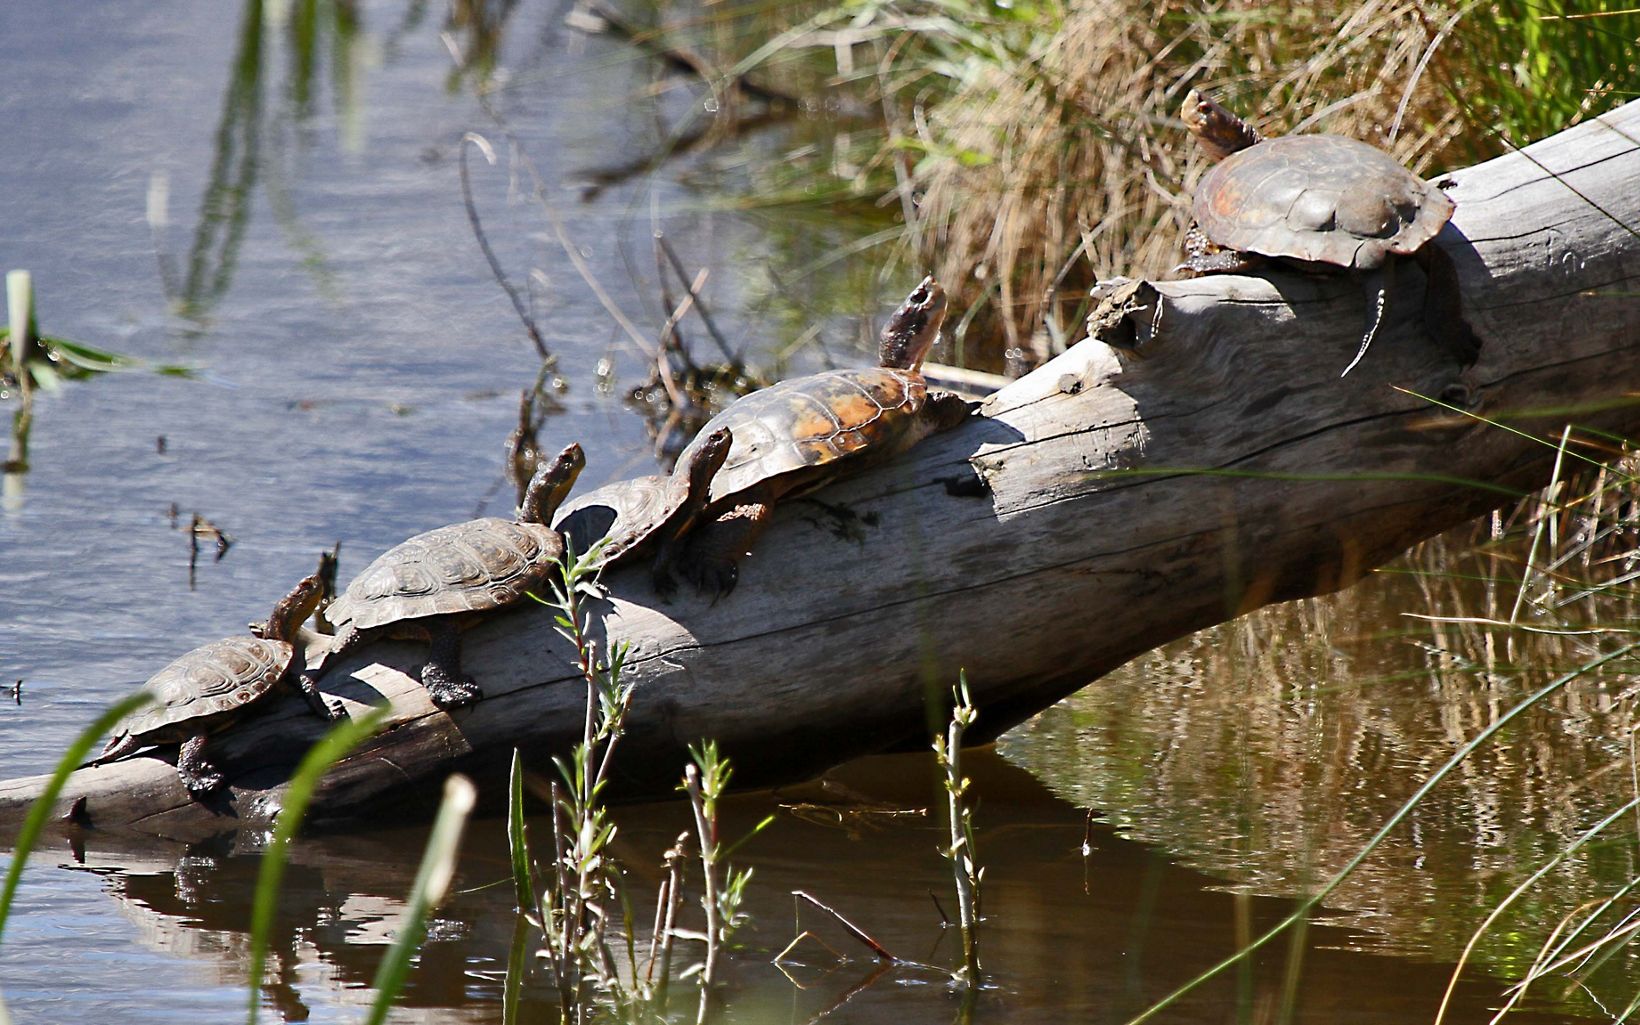 Turtles at River Fork Ranch The Western Pond Turtle lives in northwest Nevada in perennial water bodies, which are fed by groundwater, like the Truckee and Carson Rivers or nearby ponds.   © Doug Dill 